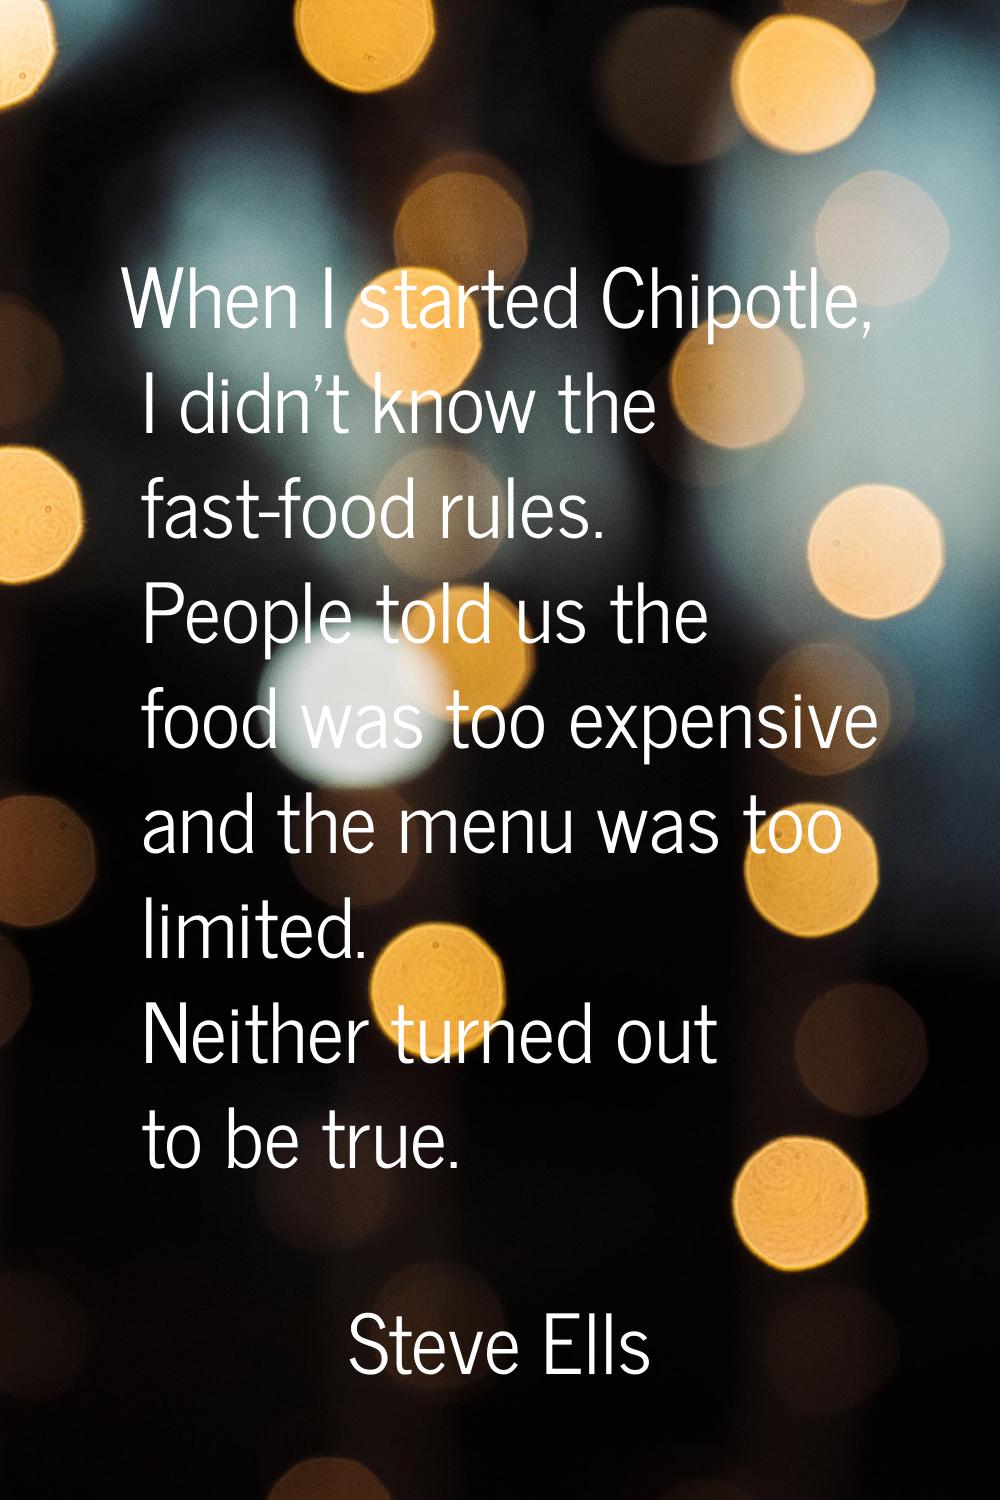 When I started Chipotle, I didn't know the fast-food rules. People told us the food was too expensi